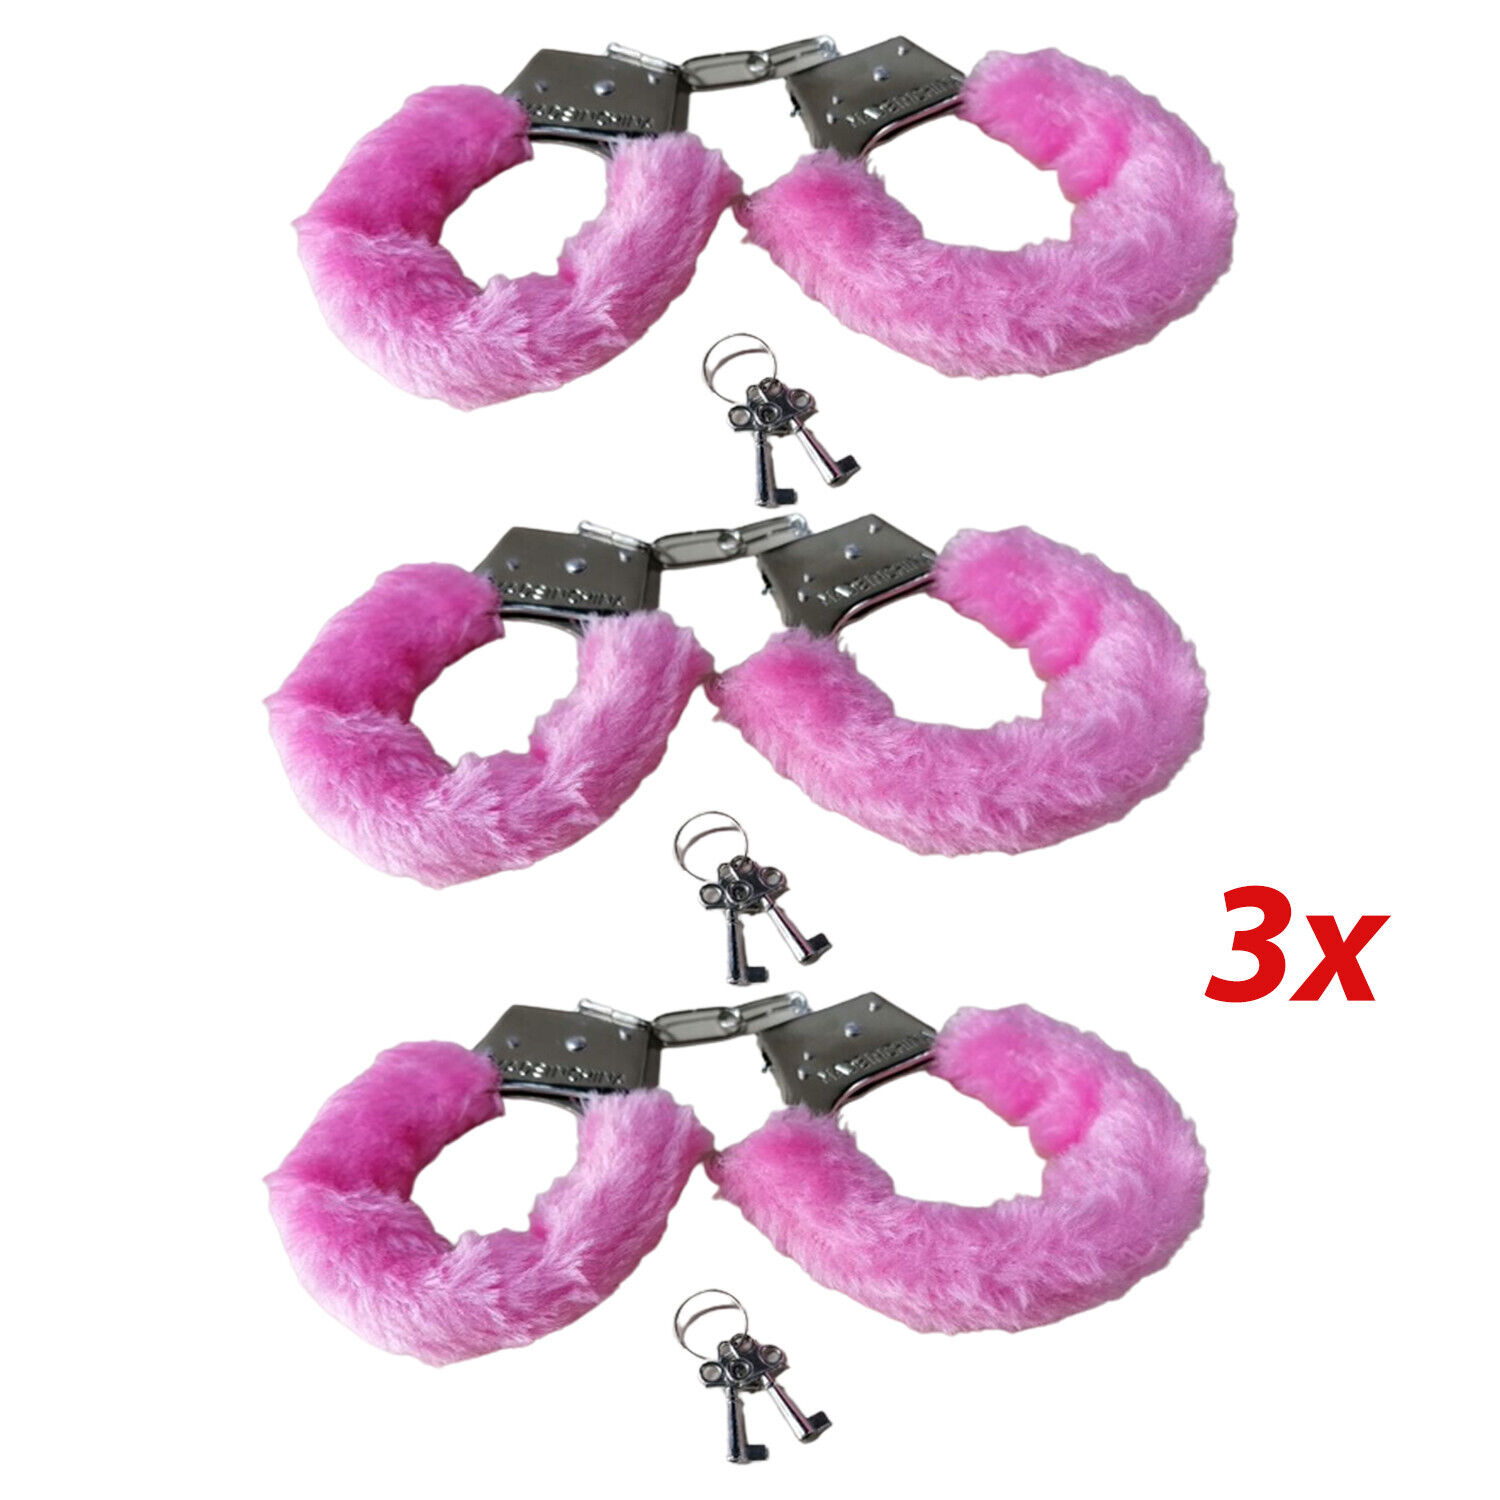 3 Furry Fuzzy Costume Handcuffs Metal Wrist Cuffs Soft Bachelorette Hen Party US Unbranded Does not apply